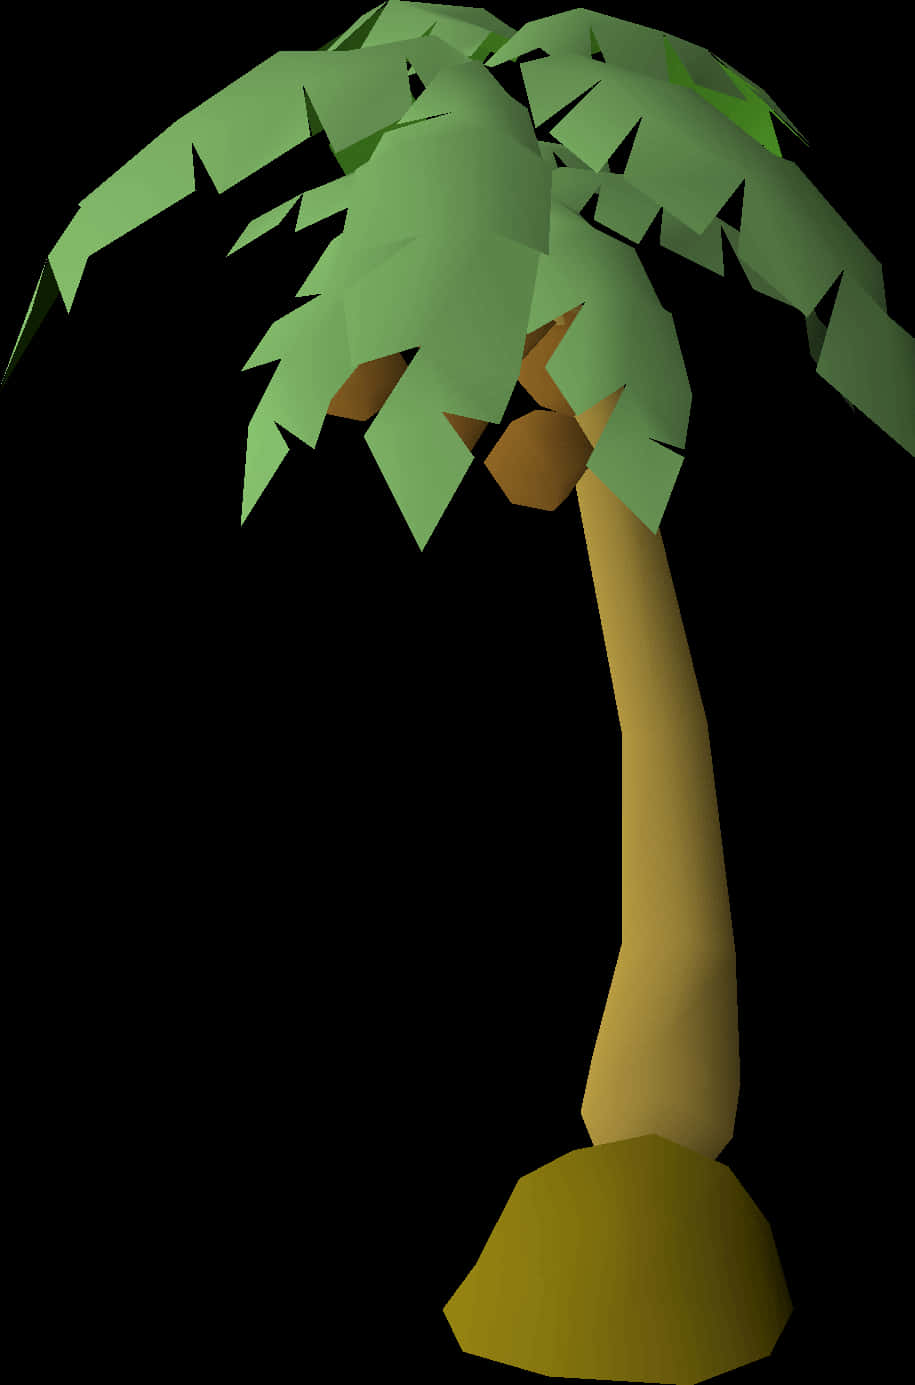 Low Poly Palm Tree Graphic PNG